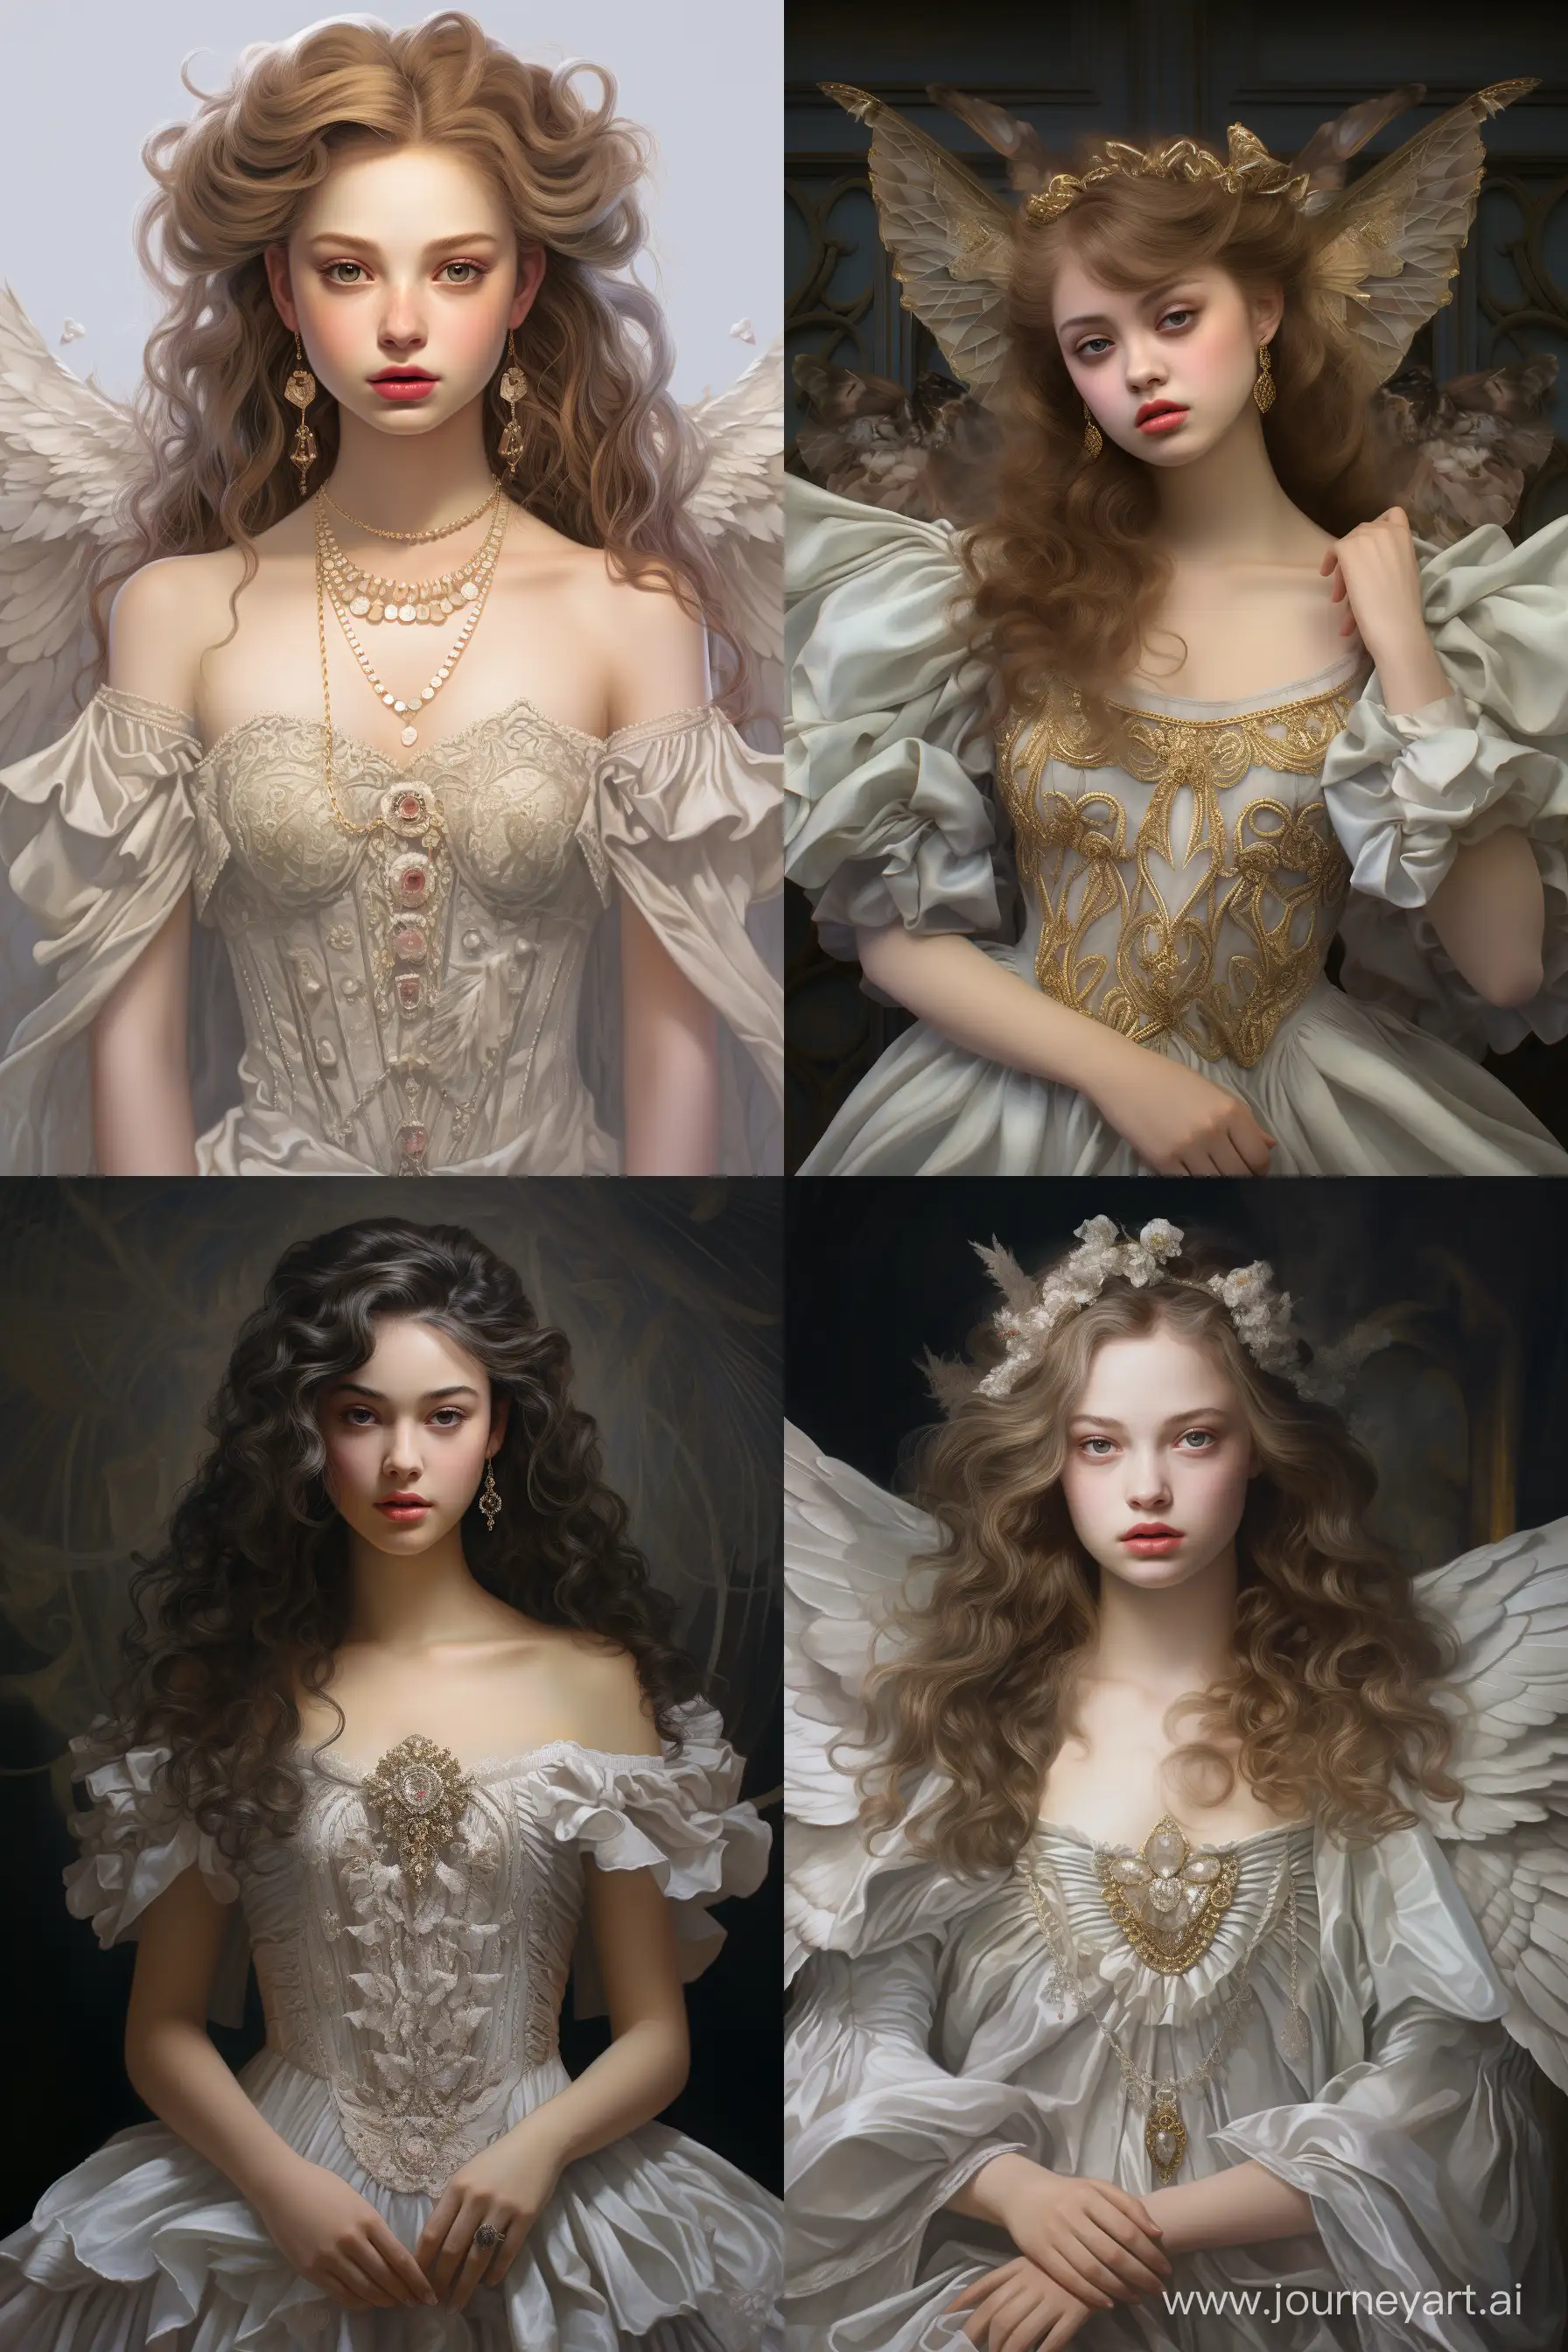 Ethereal-Elegance-Stunning-Portrait-of-a-19YearOld-Angelic-Princess